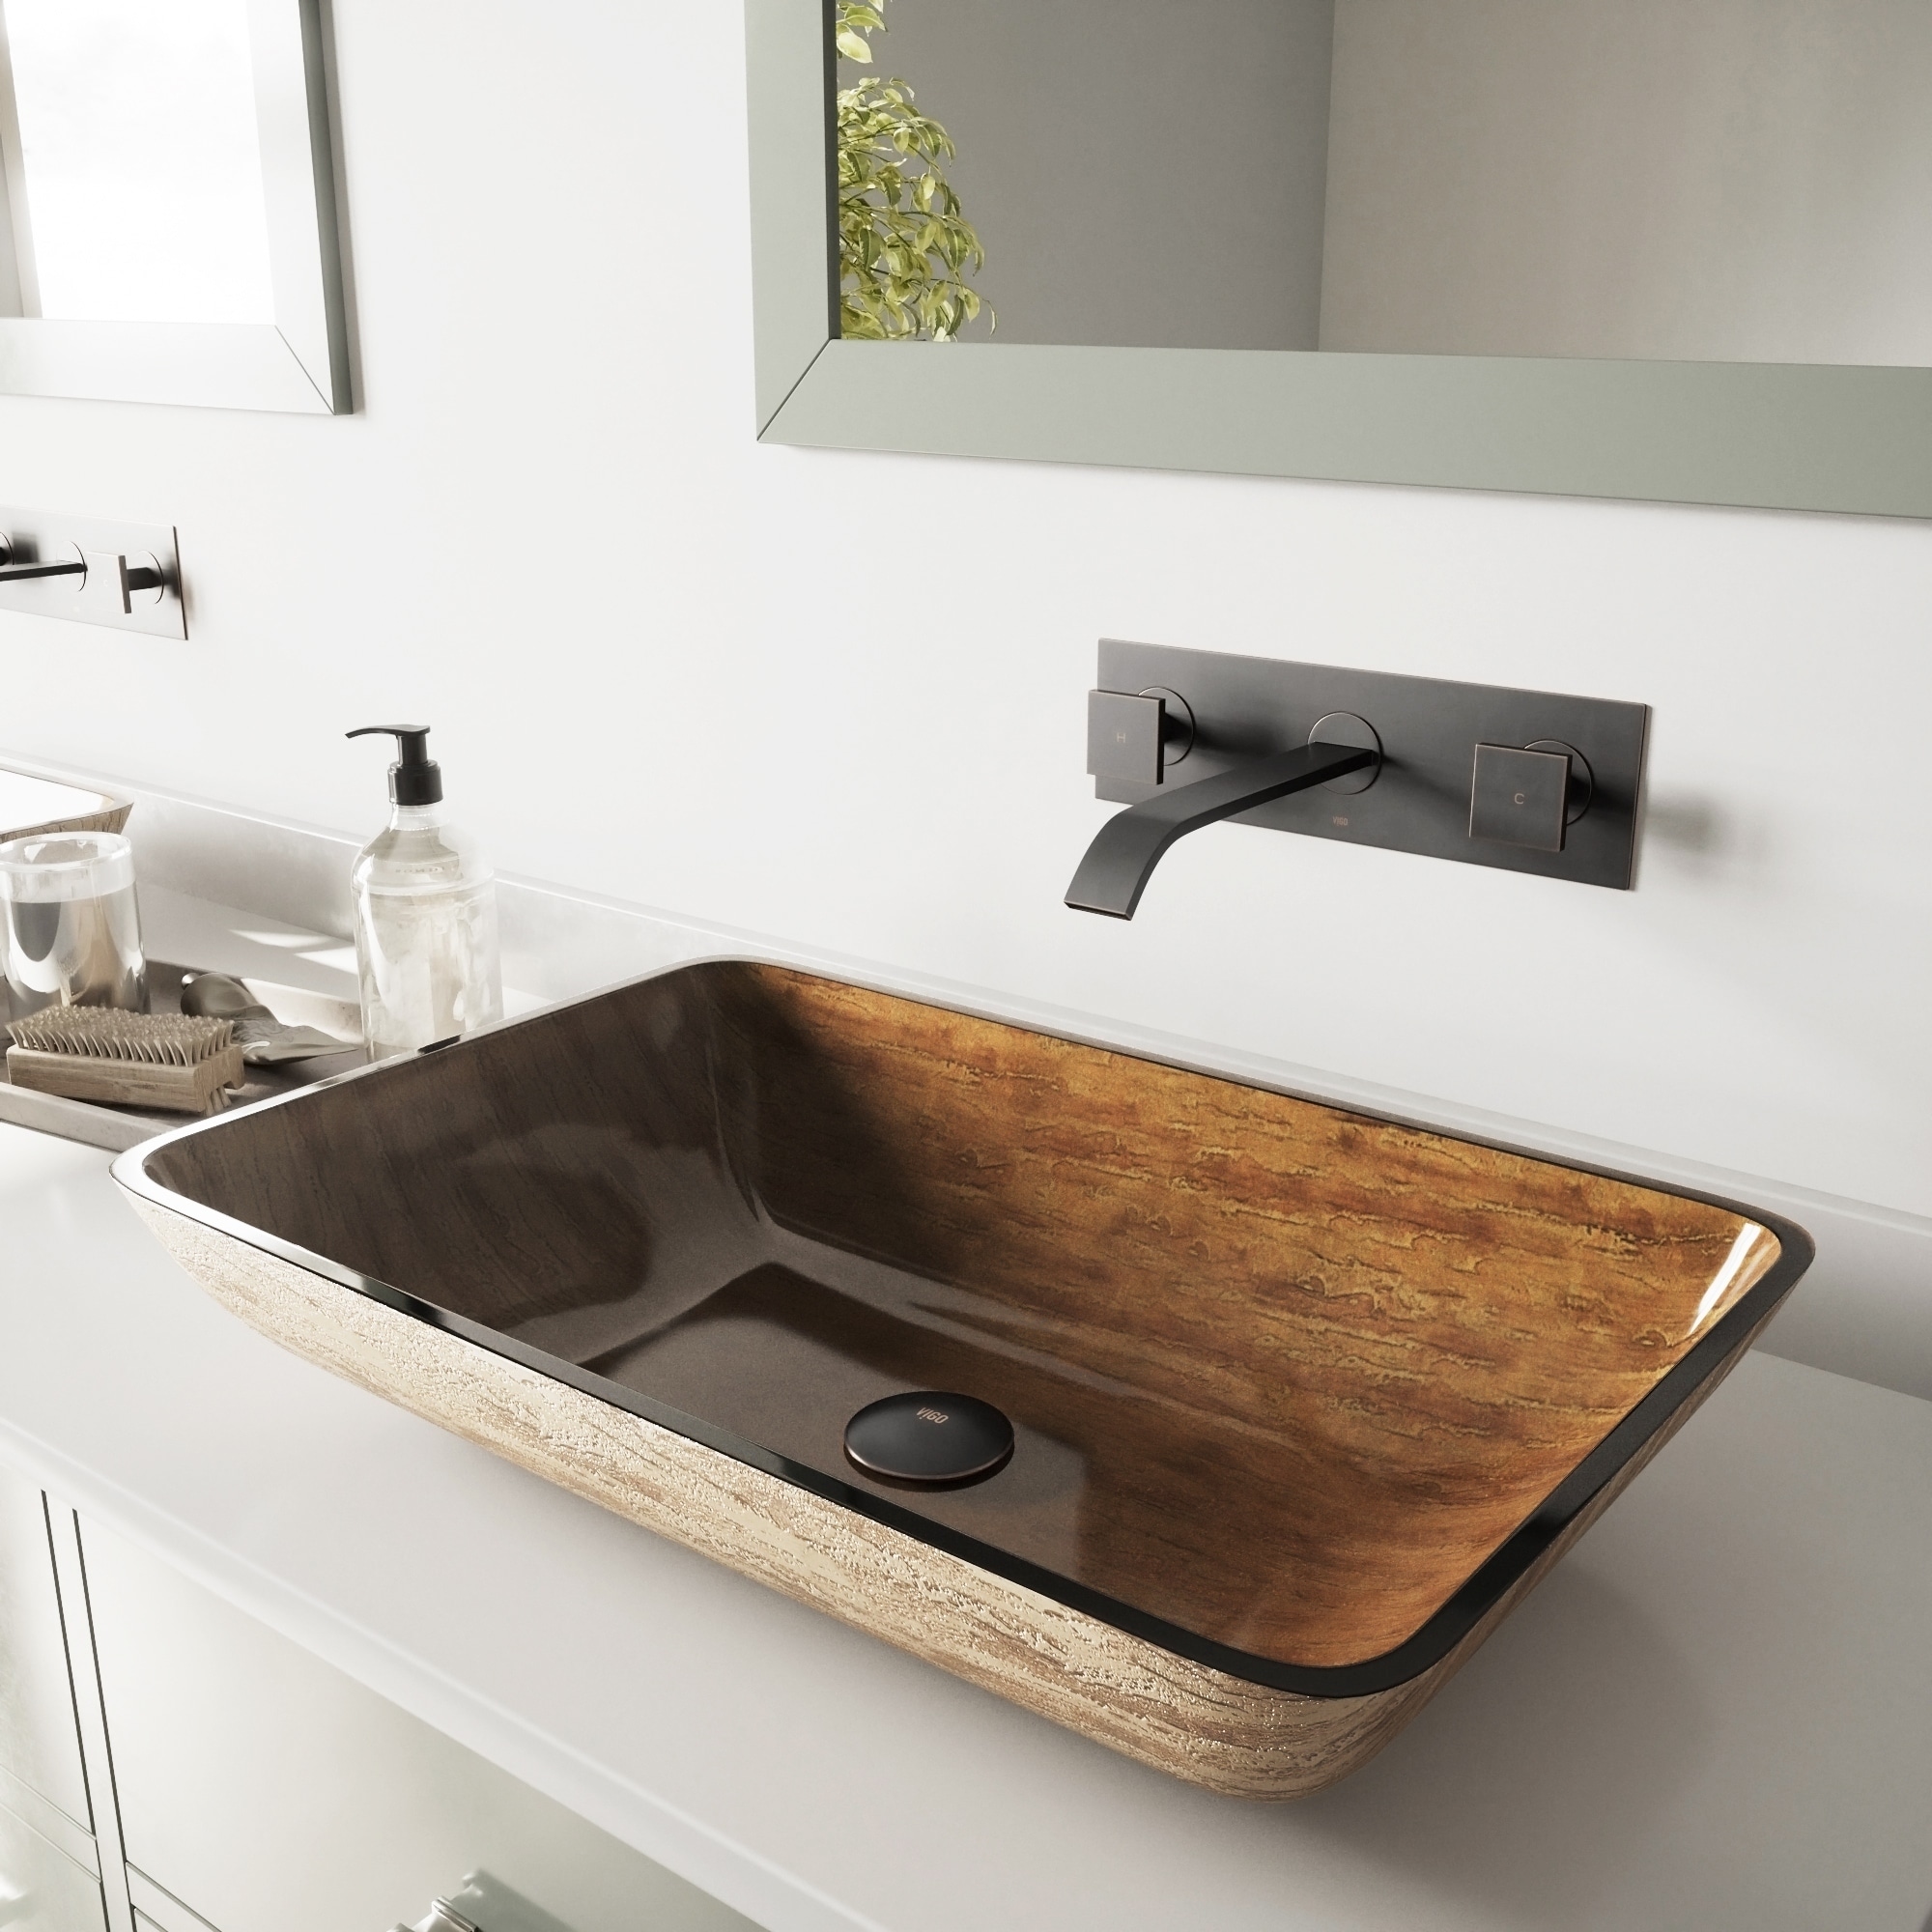 Vigo Rectangular Amber Sunset Glass Vessel Sink And Wall Mount Faucet In Antique Rubbed Bronze